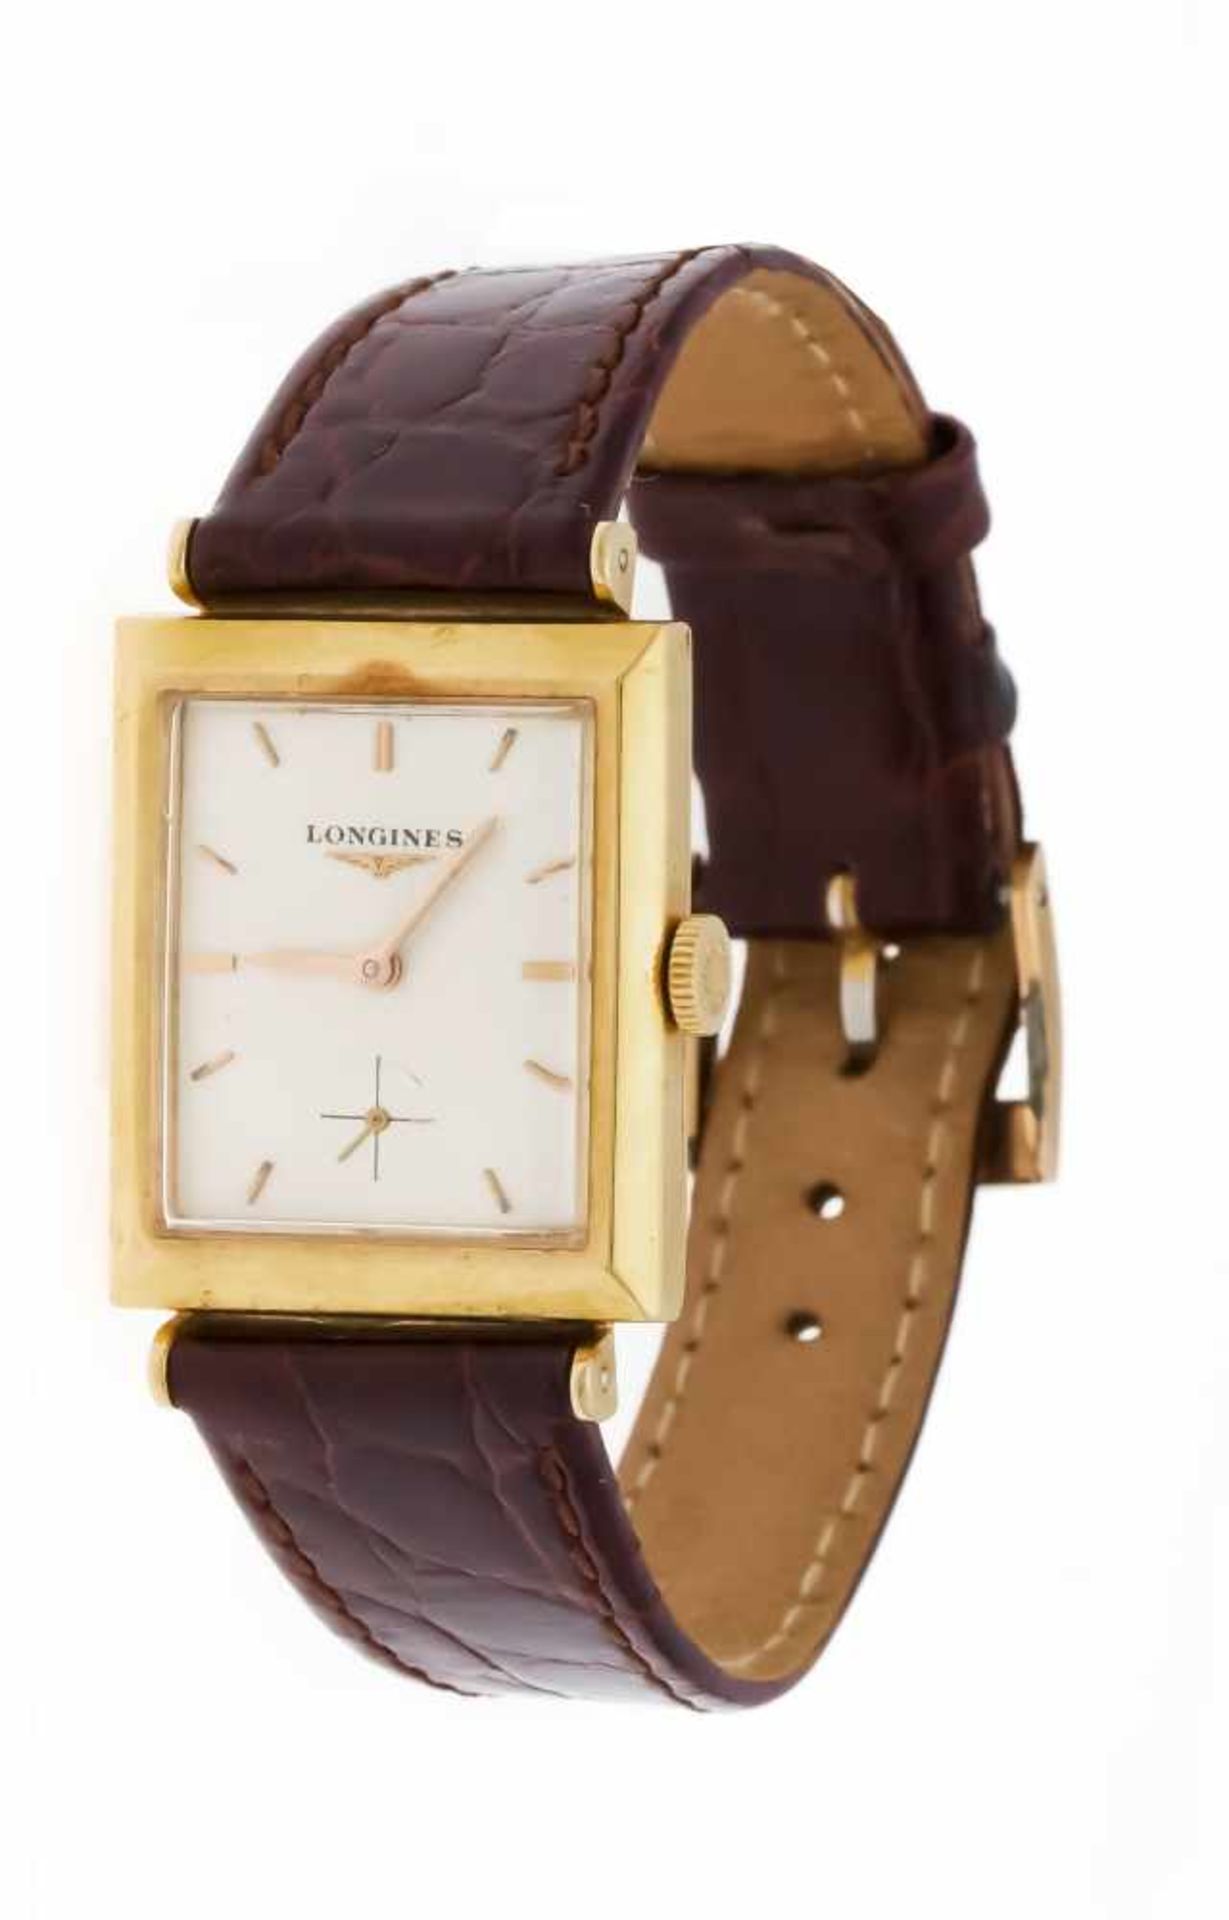 Longines gold watch, yellow gold / 750, manual winding Cal. 370, exactly, champagne-free.